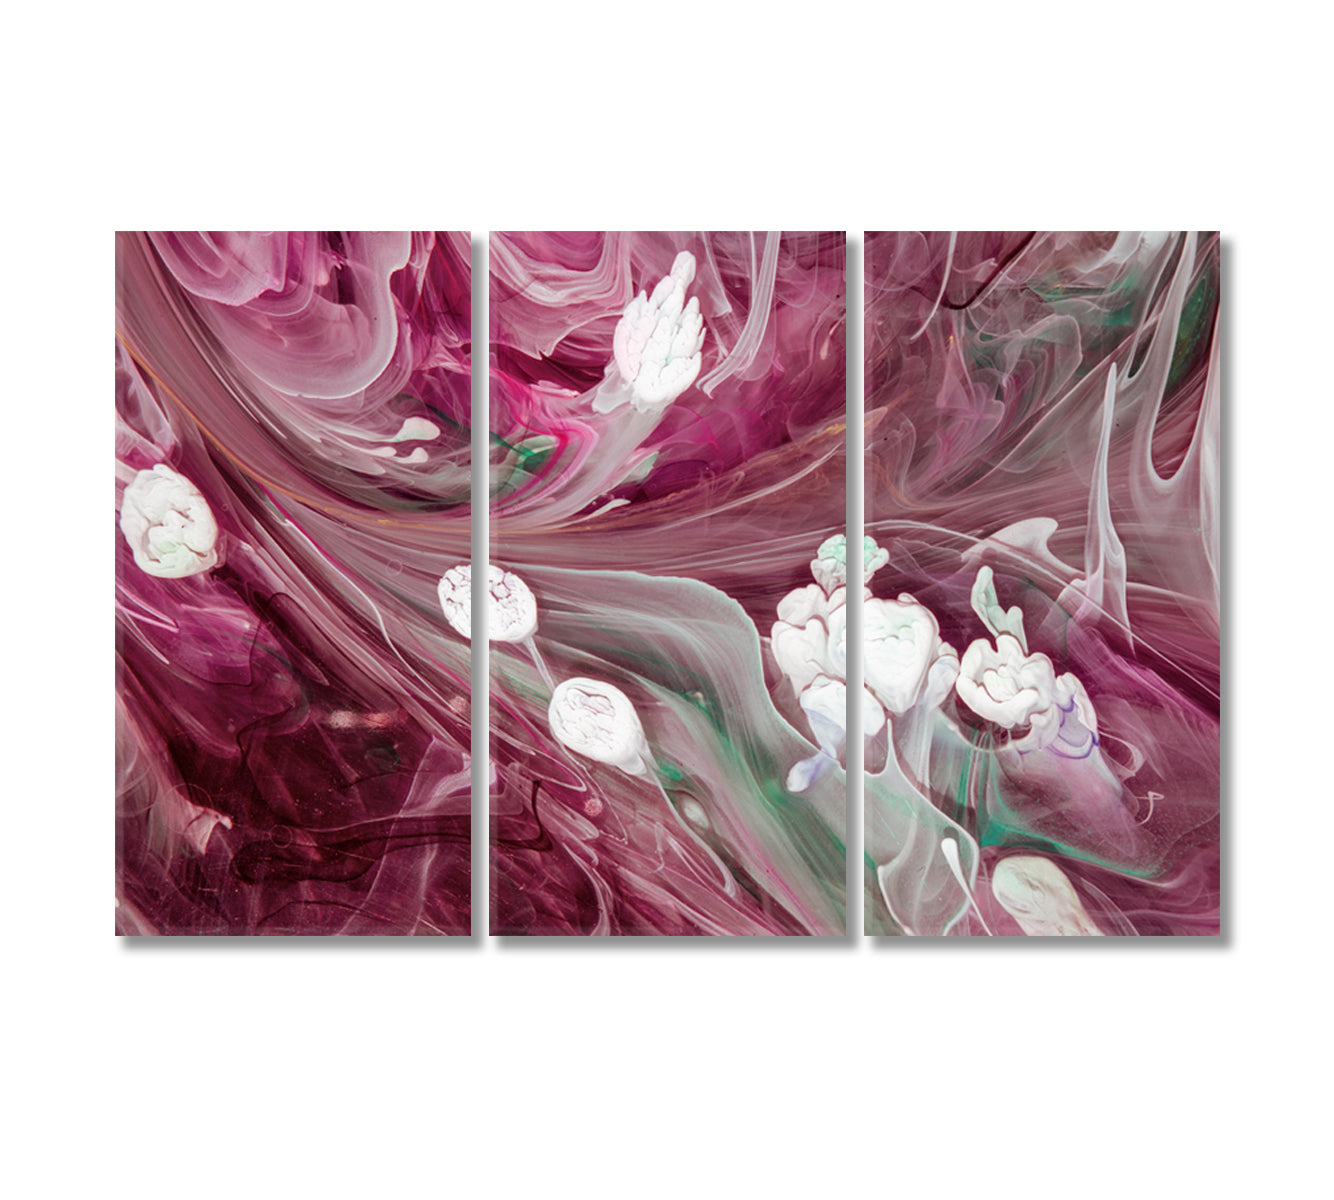 Contemporary Abstract Overflows of Shades and Colors Paints Canvas Print-Canvas Print-CetArt-3 Panels-36x24 inches-CetArt